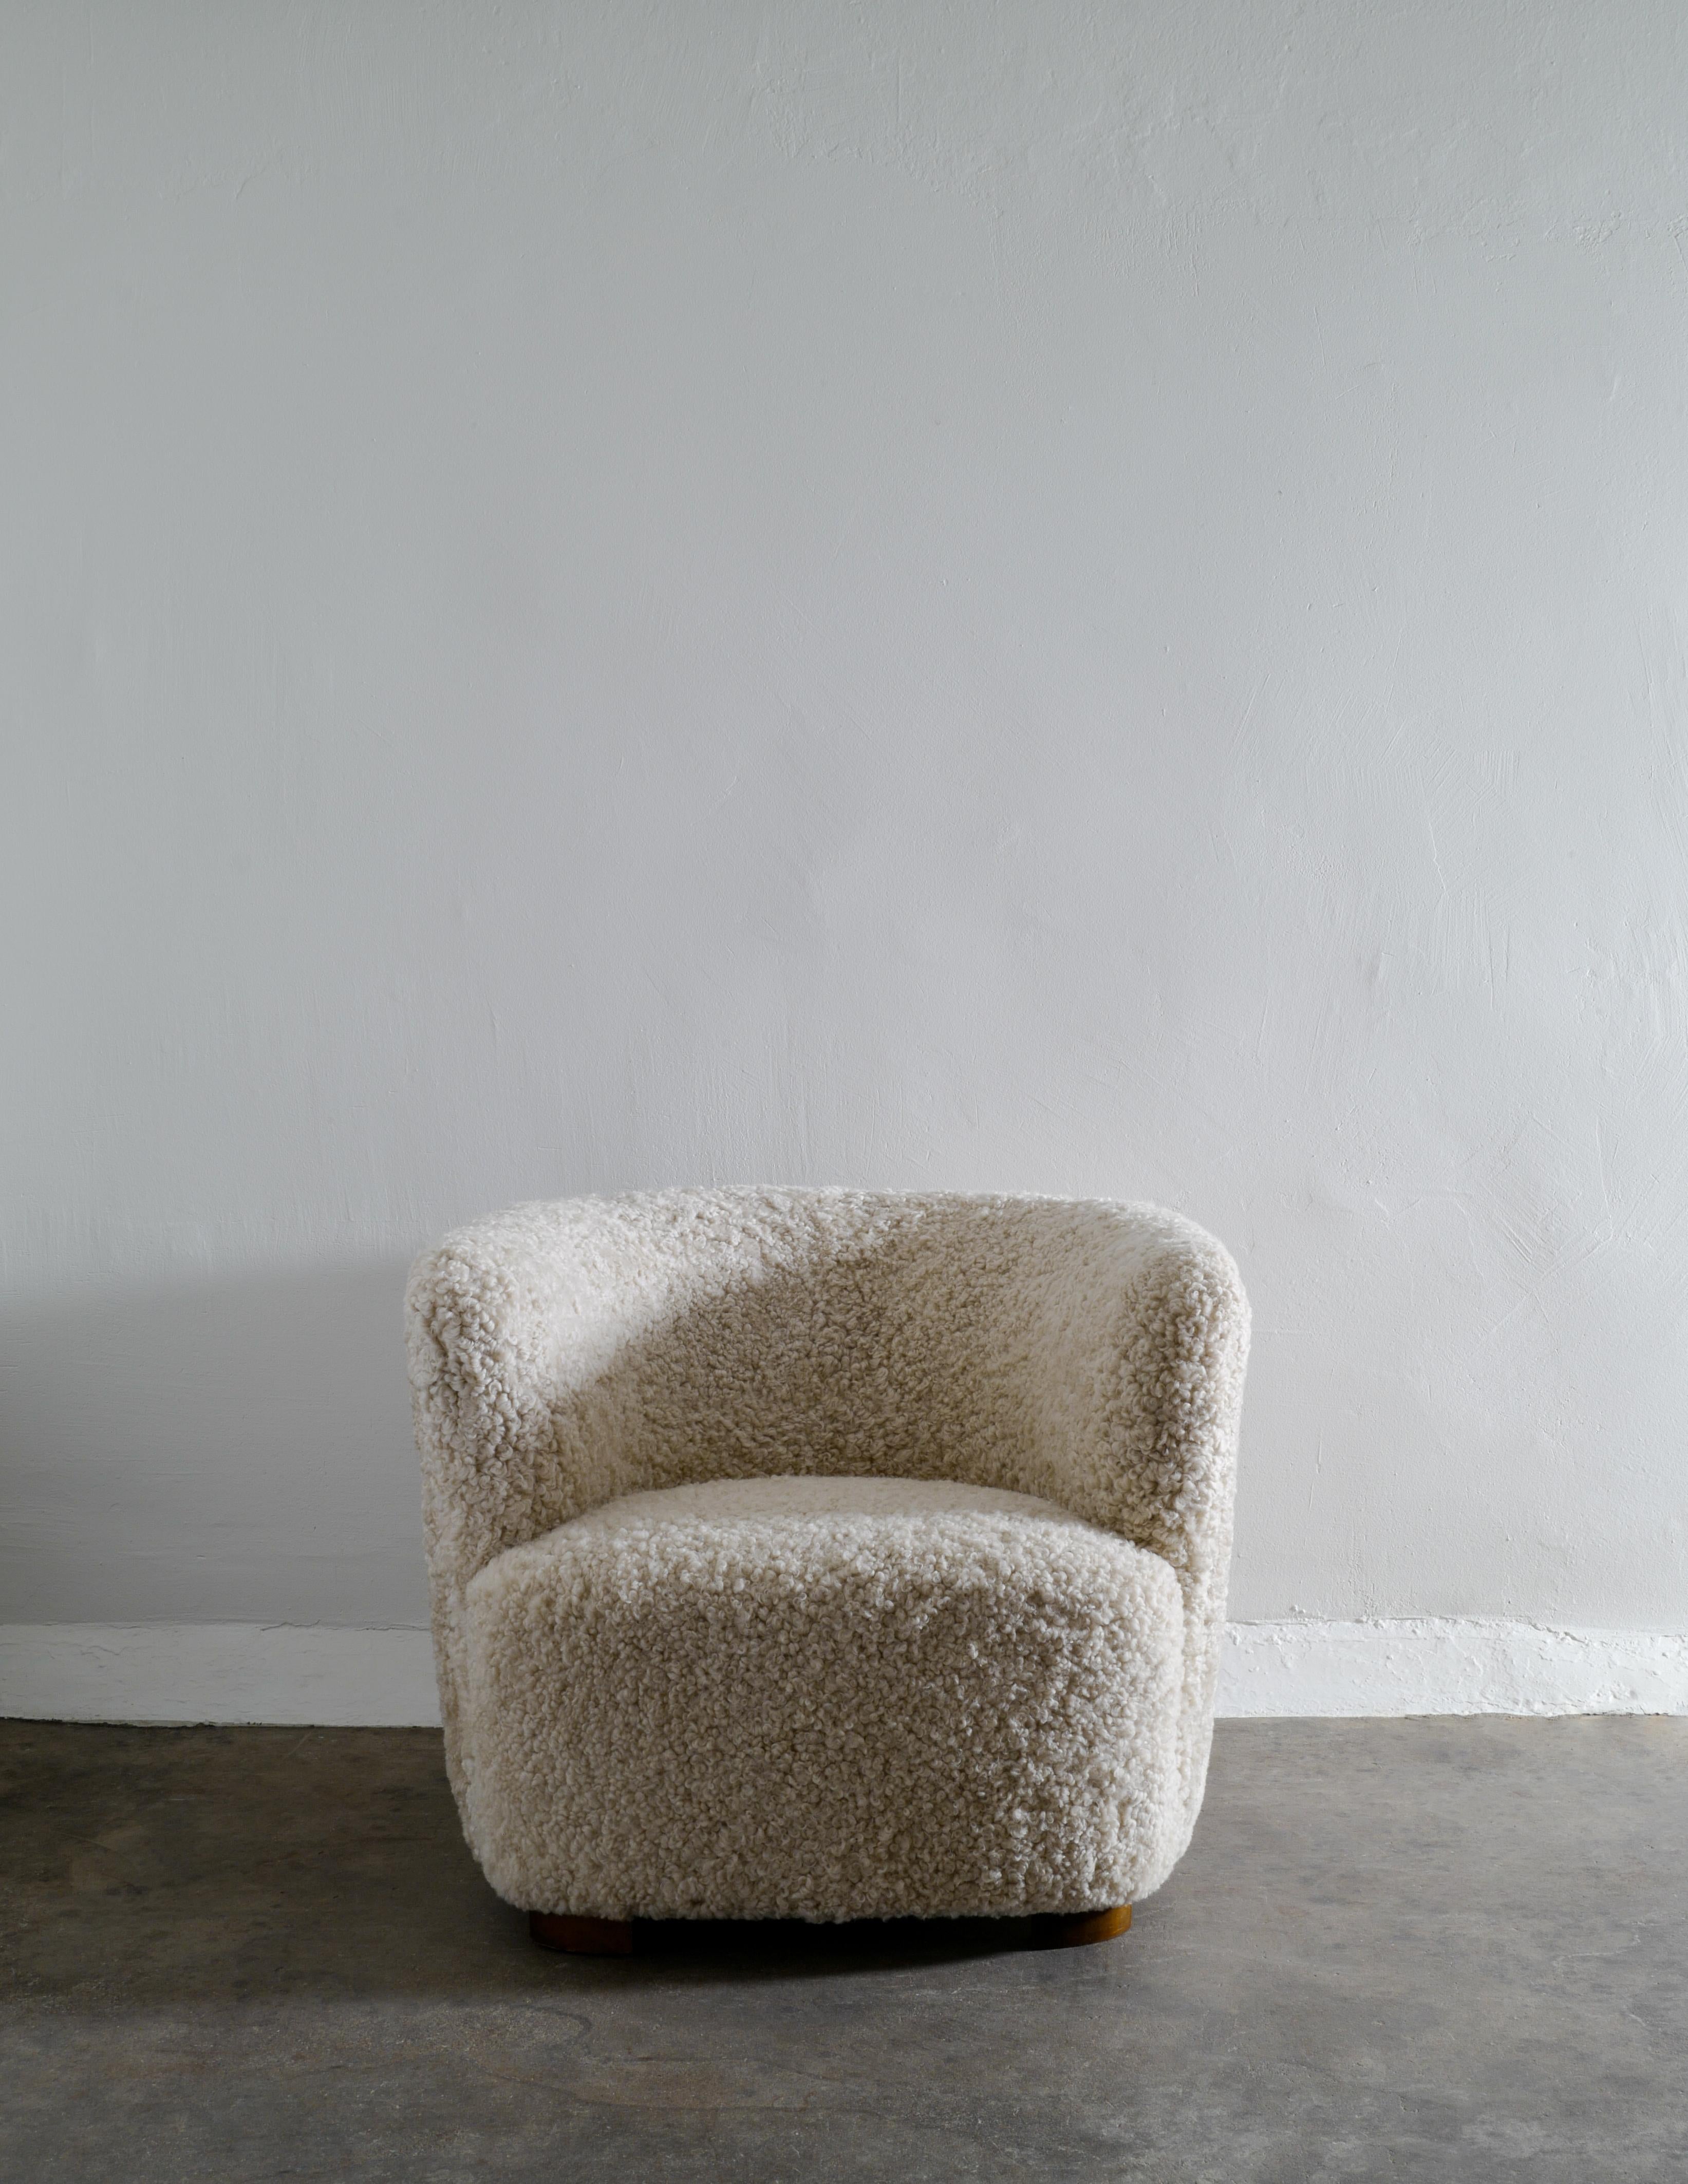 Rare curved easy chair produced in Denmark in the 1940s by unknown designer. Fully restored and upholstered in sheepskin. Oak feet. Attributed to Flemming Lassen and Viggo Boesen. 

Dimensions: H: 67 cm W: 85 cm D: 85 cm SH: 38 cm.